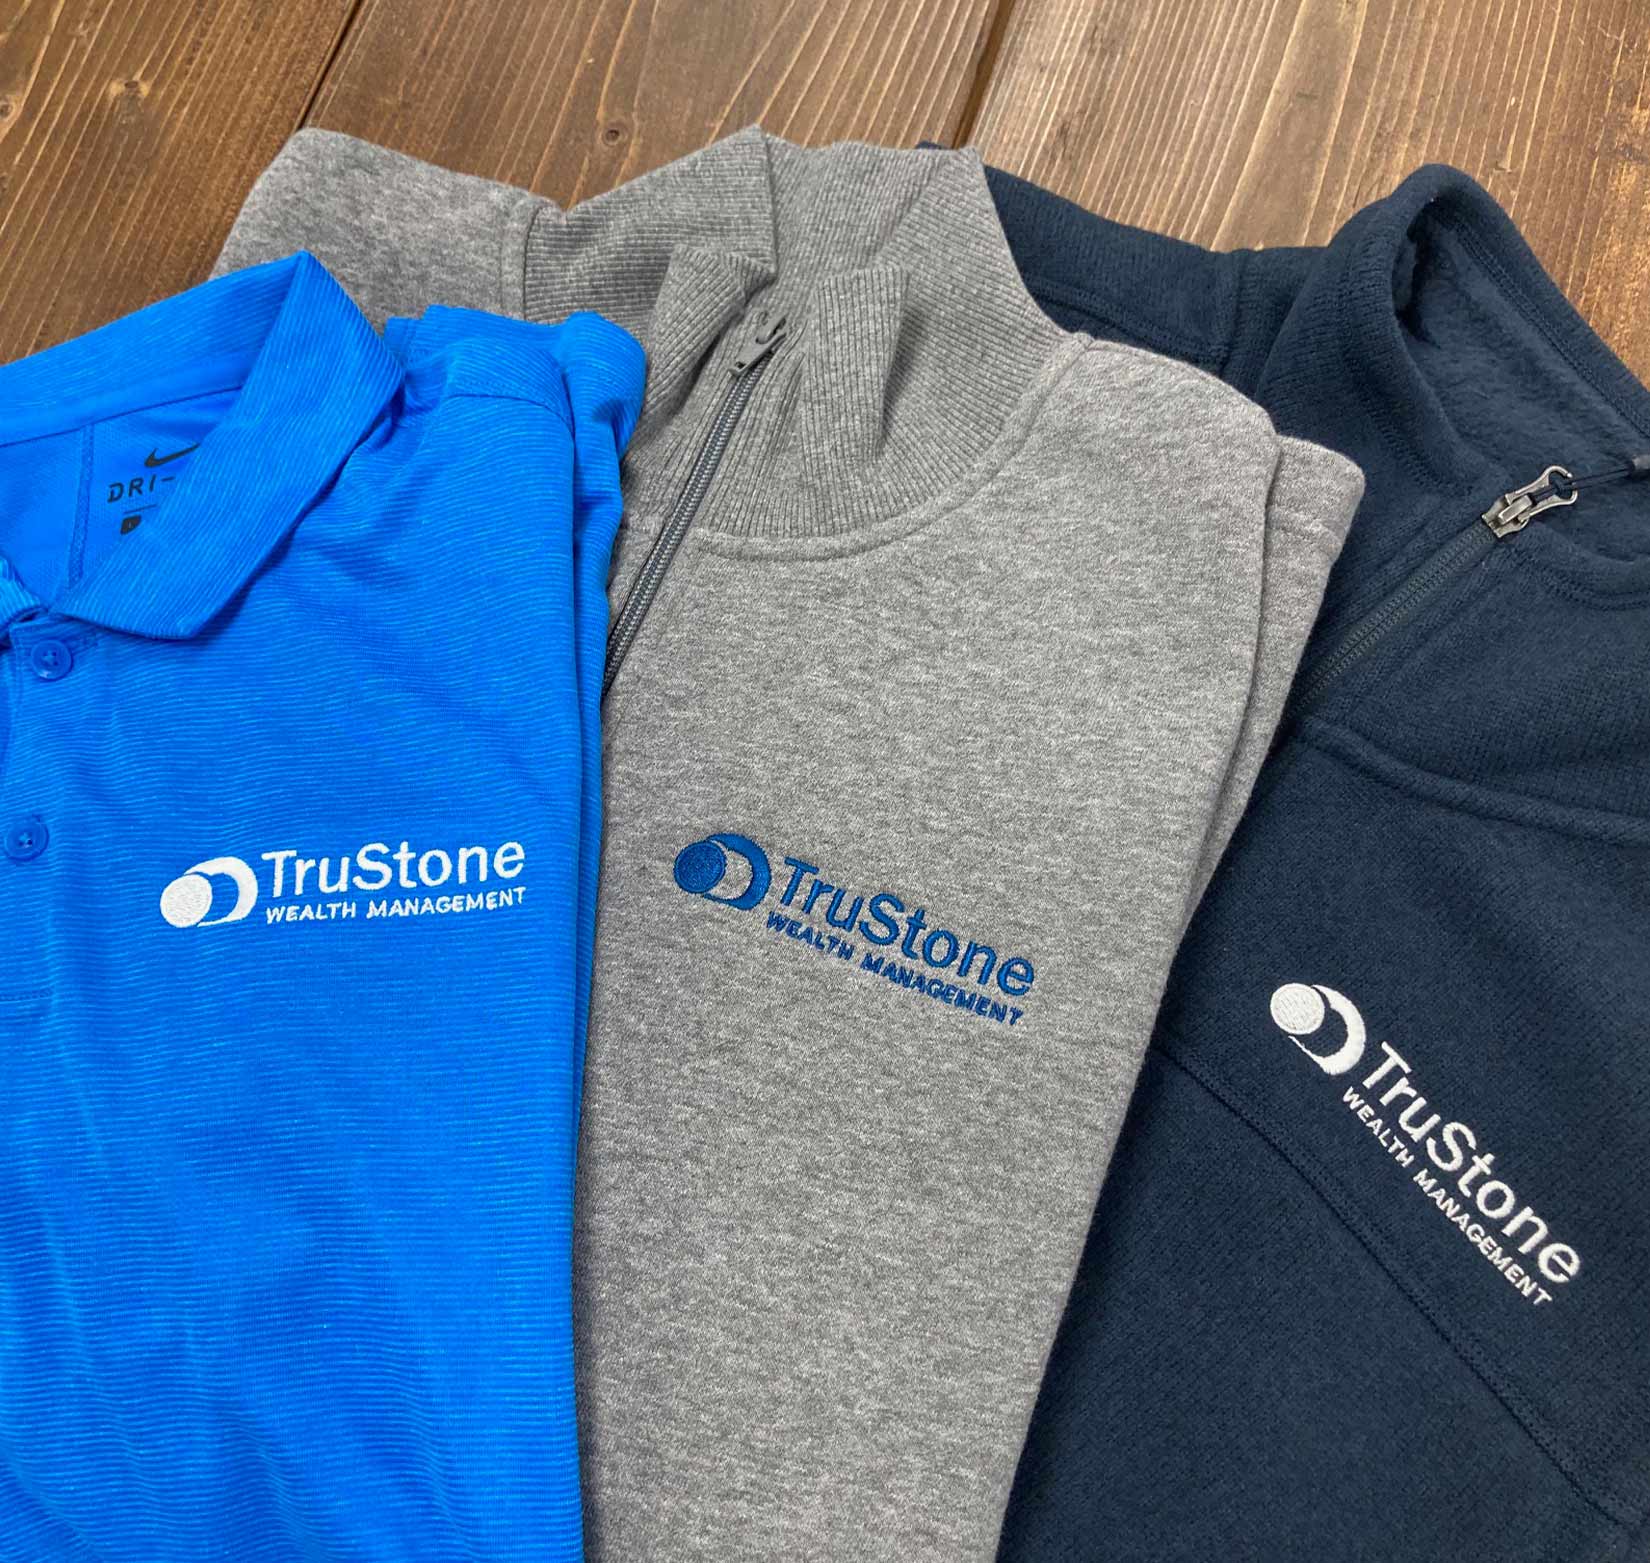 TruStone logo embroidered on apperal.